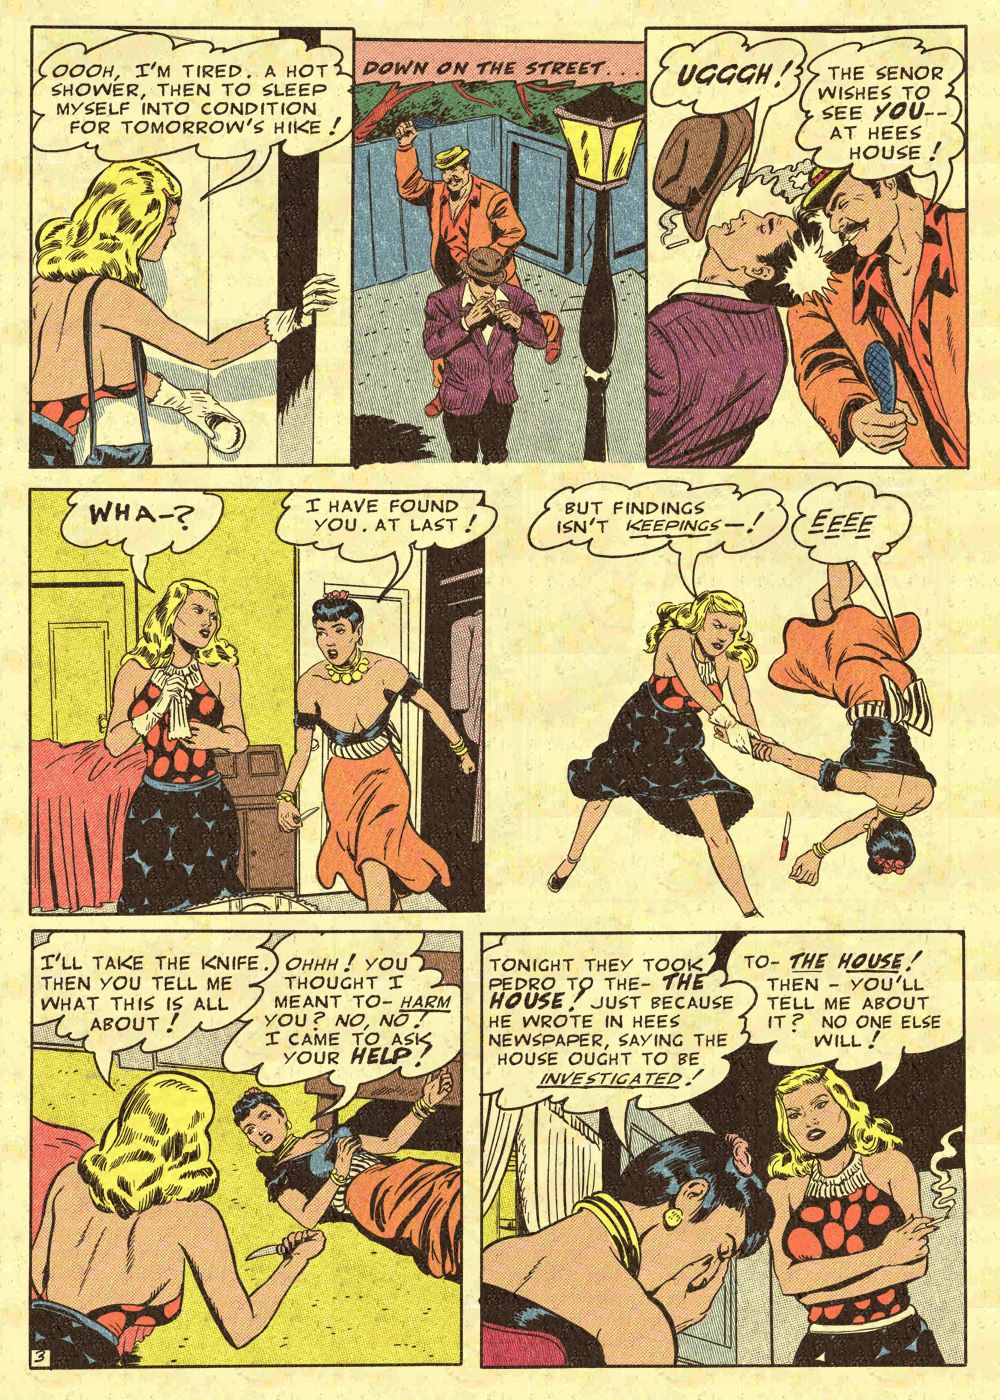 The Wertham Files Undercover Girl - part 2